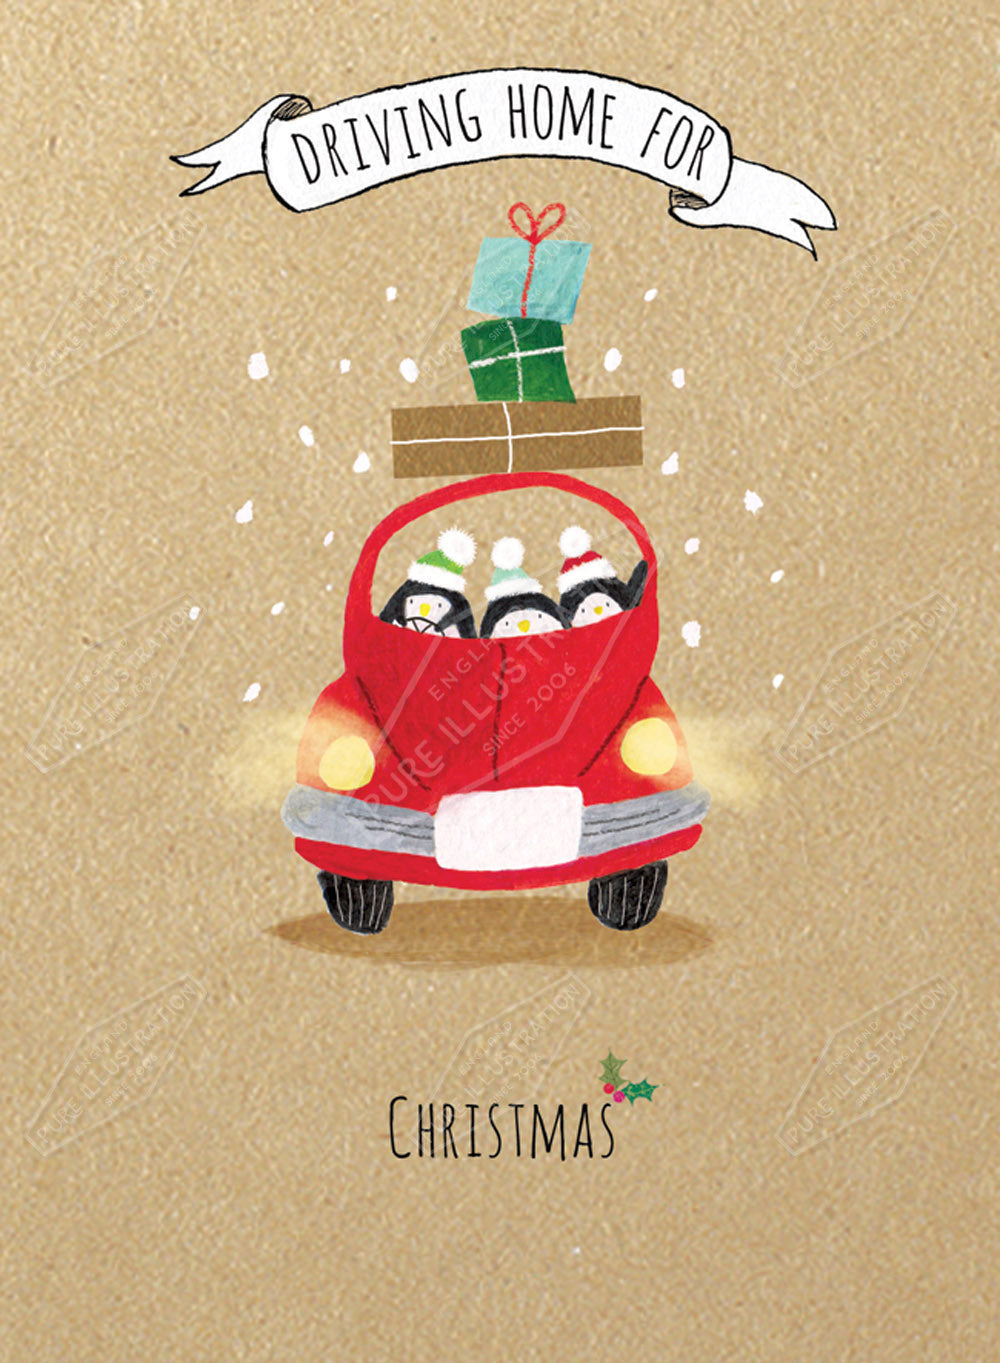 00029599CRE - Penguins Driving Home for Christmas Design by Cory Reid for Pure Art Licensing Agency